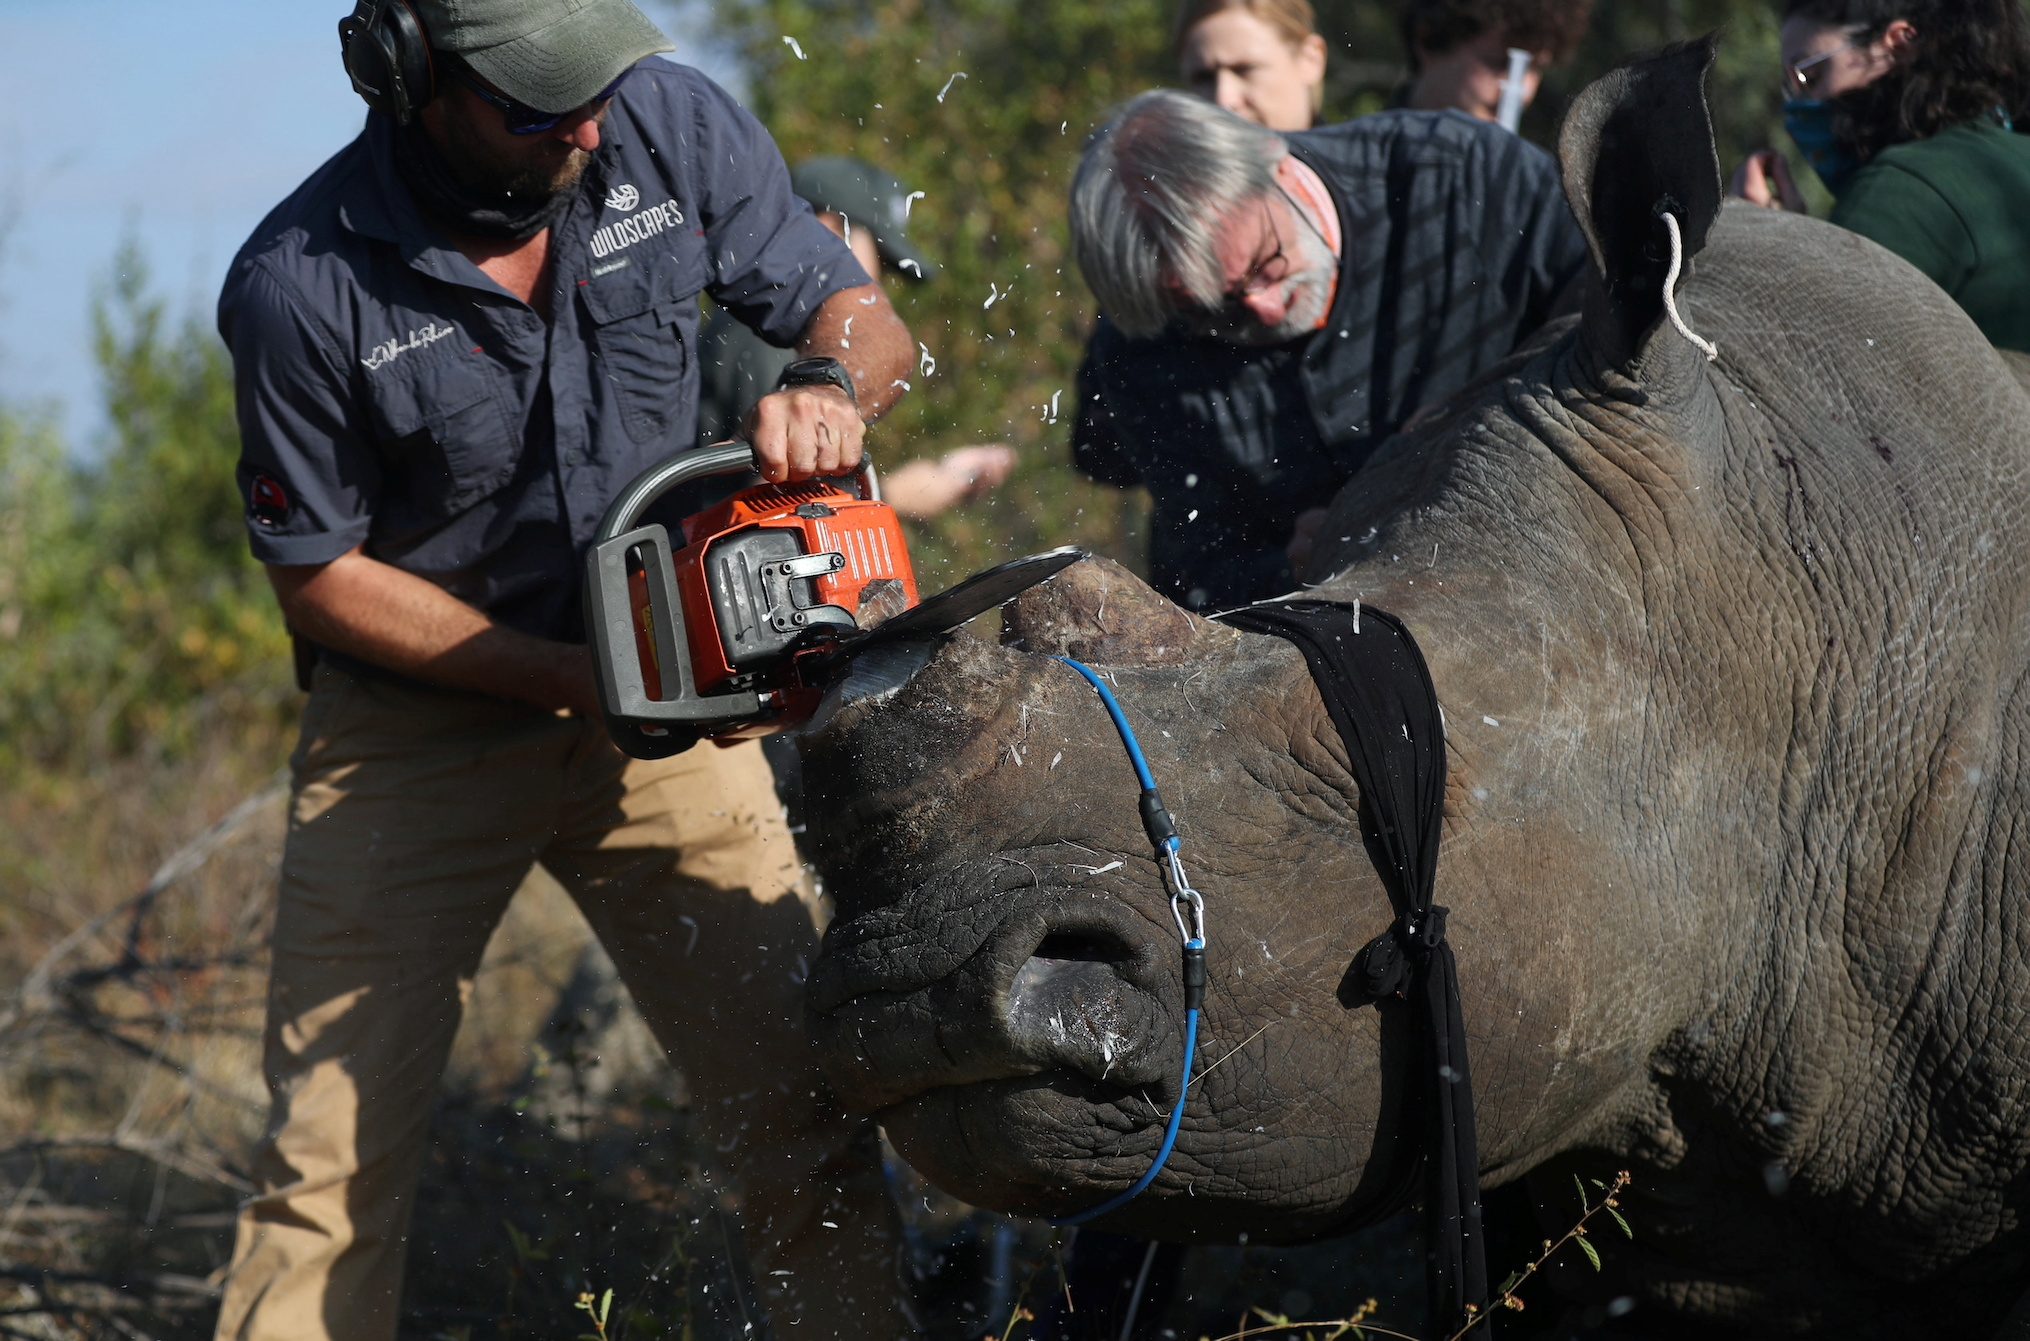 Rhino poachers are back after South Africa eases lockdown restrictions